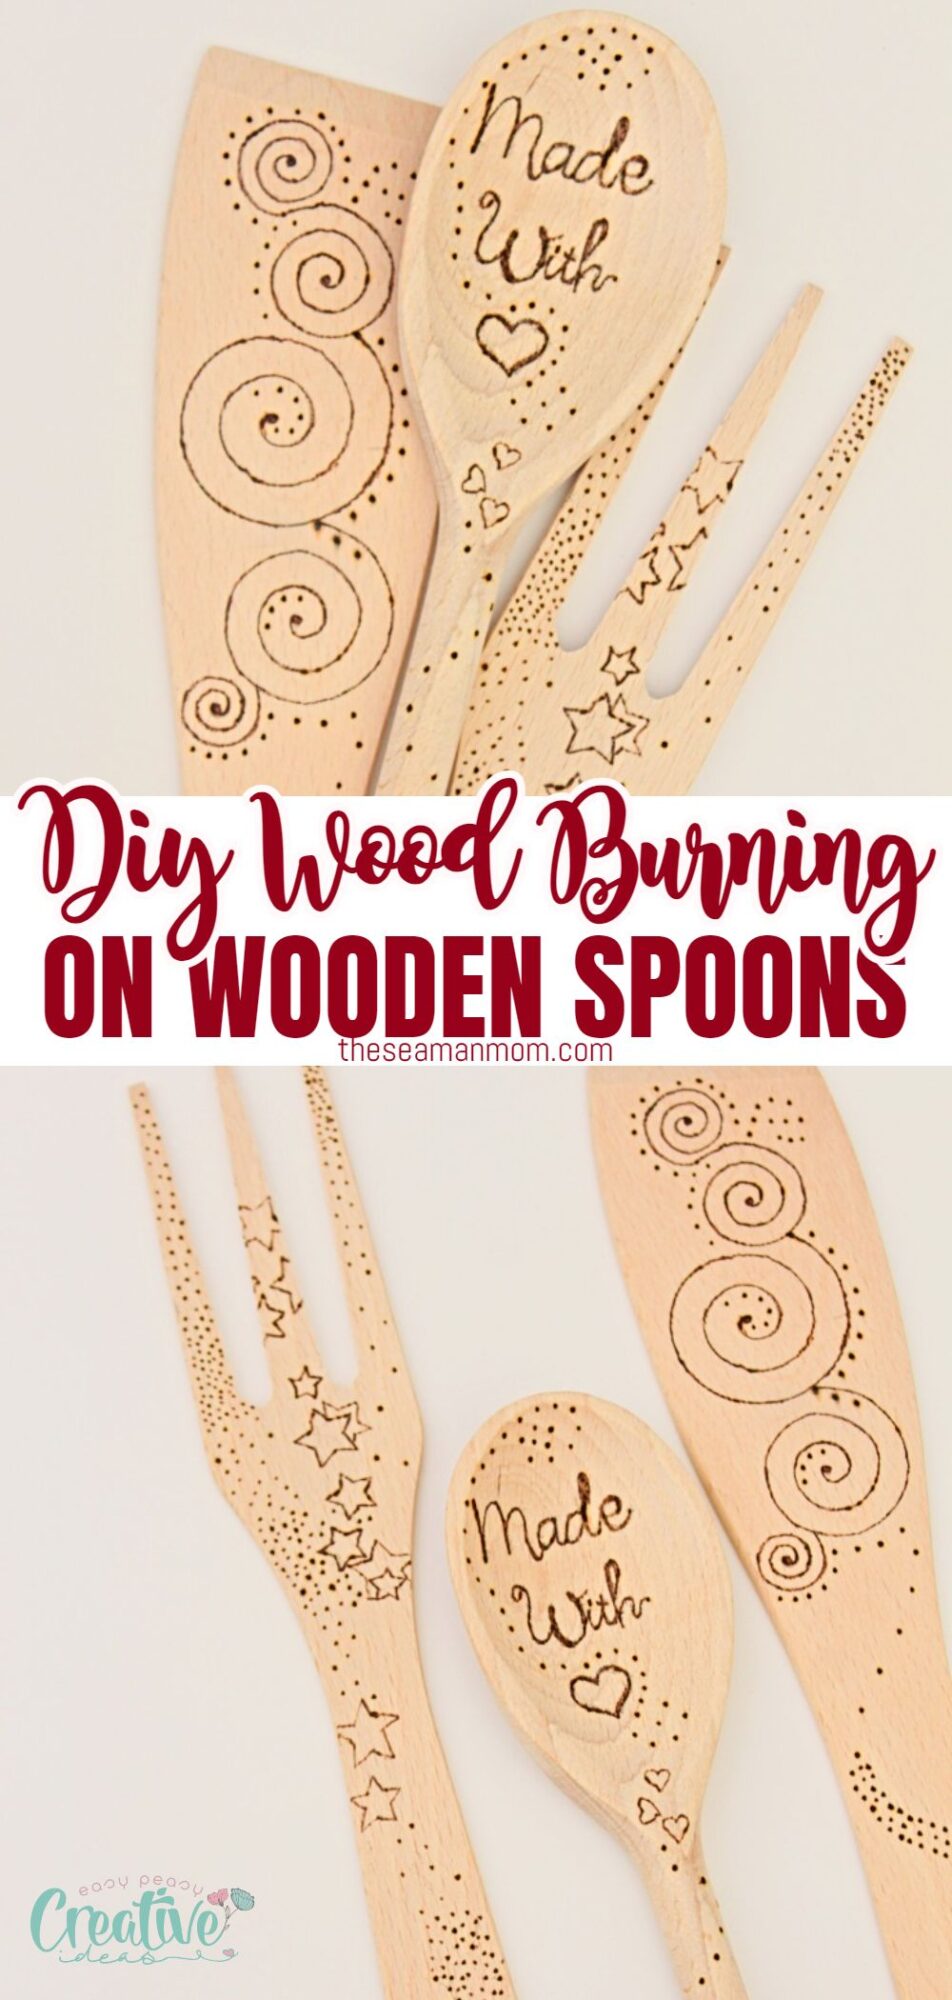 Customized wooden spoons with DIY wood burning, a delightful crafting technique!